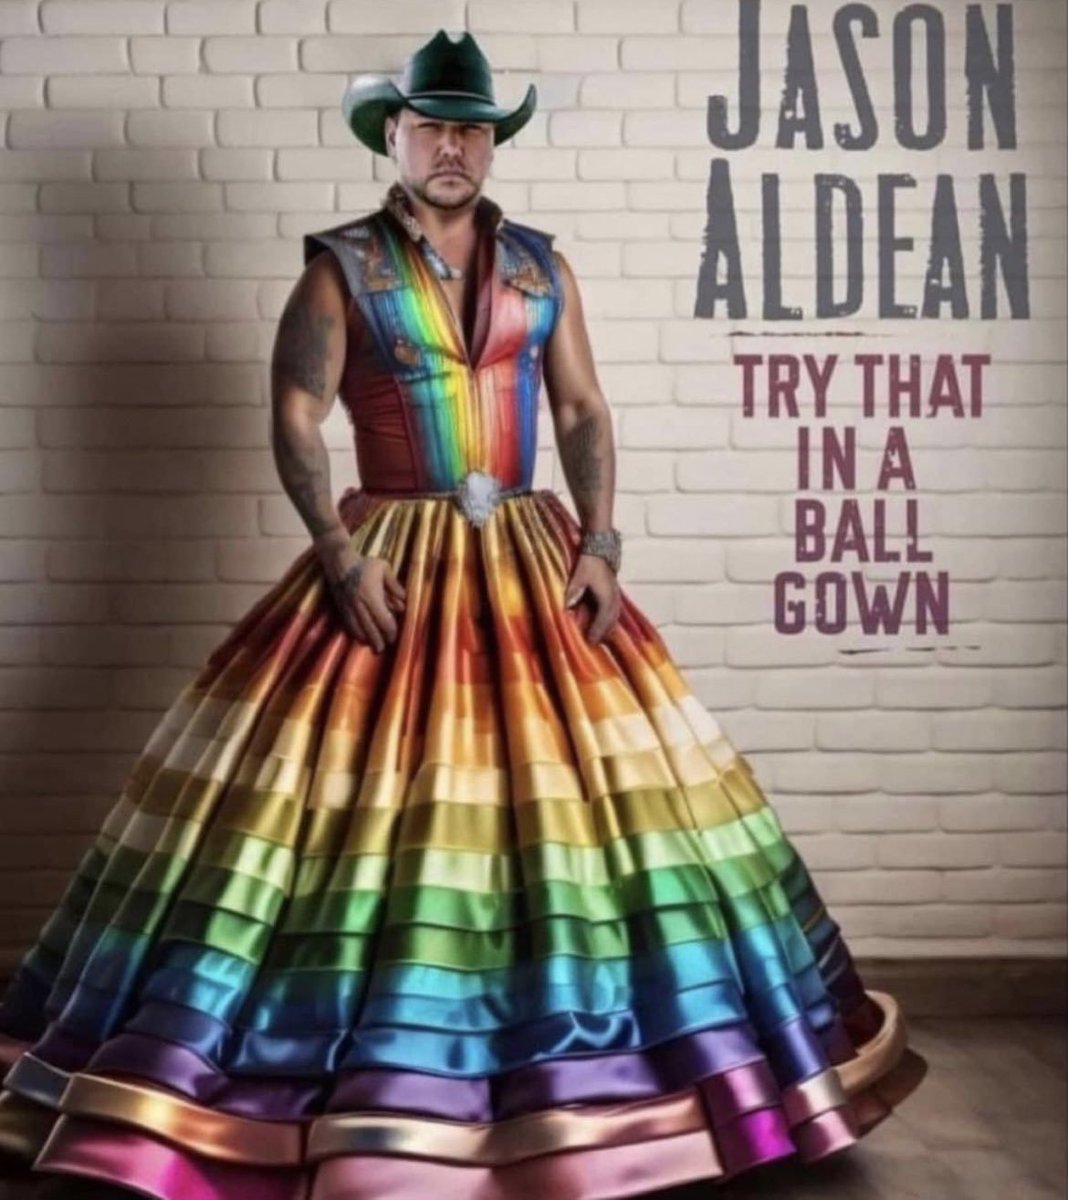 Jason Aldean HATES this picture. Ruin his day by sharing it.